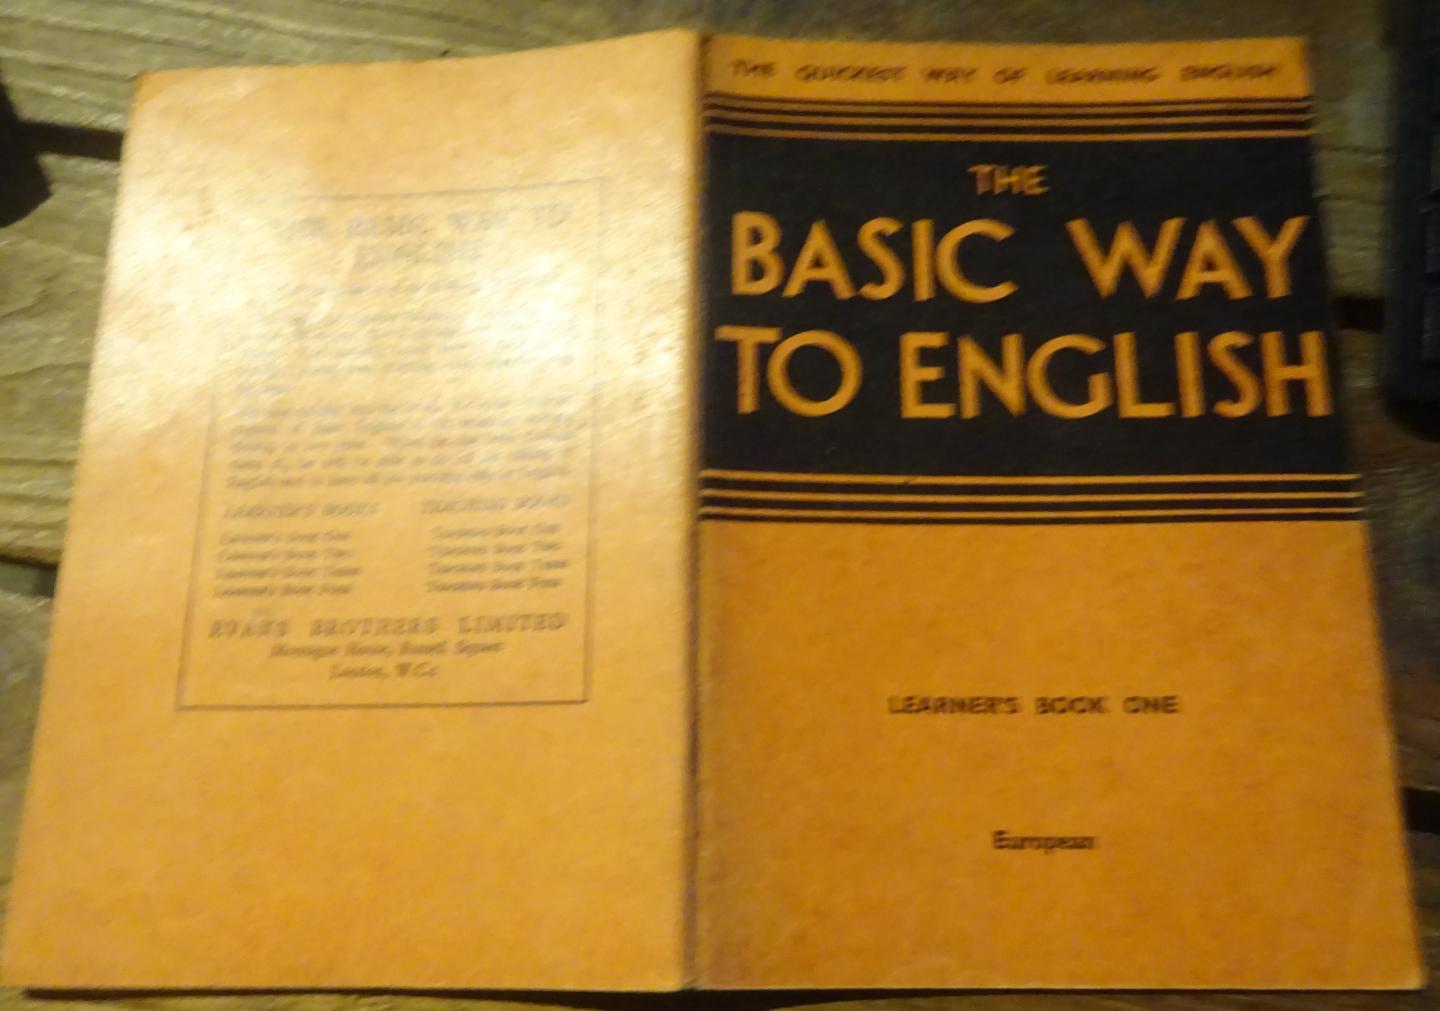 diverse - The Basic Way to English -  Learner's book one